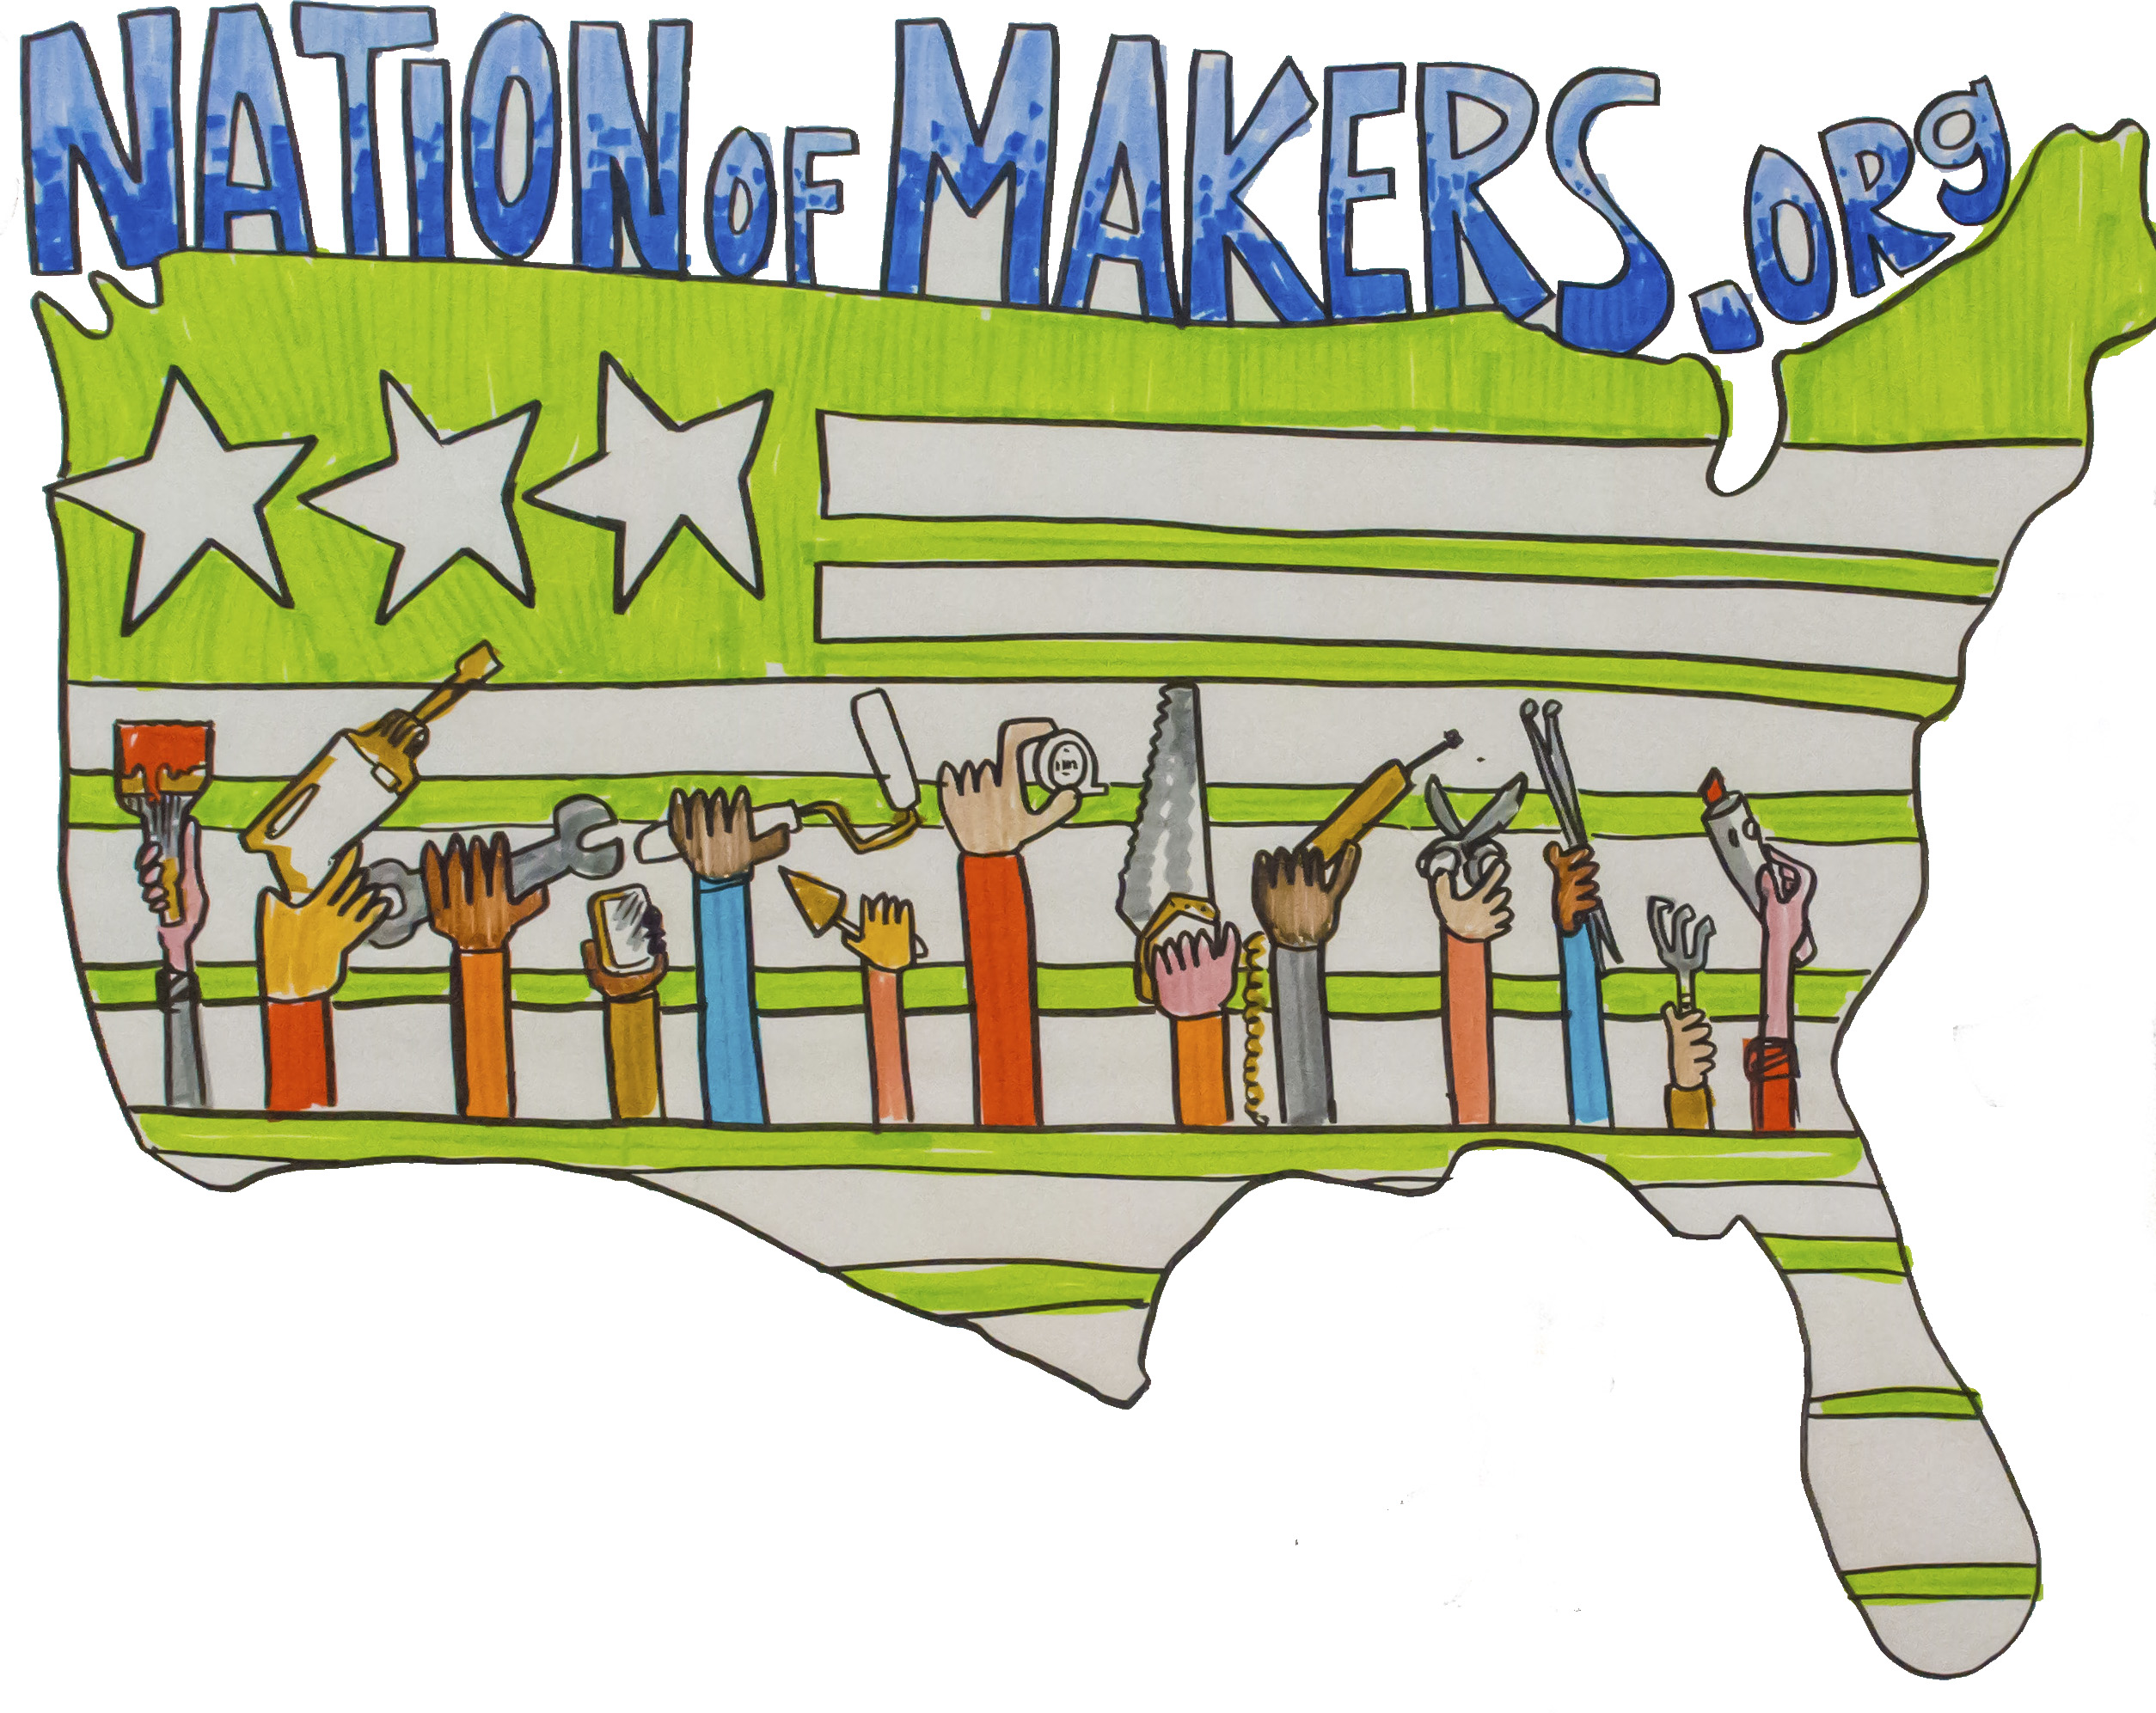 Building a Nation of Makers: Celebrating the Creativity, Ingenuity, and Diversity of the Maker Community